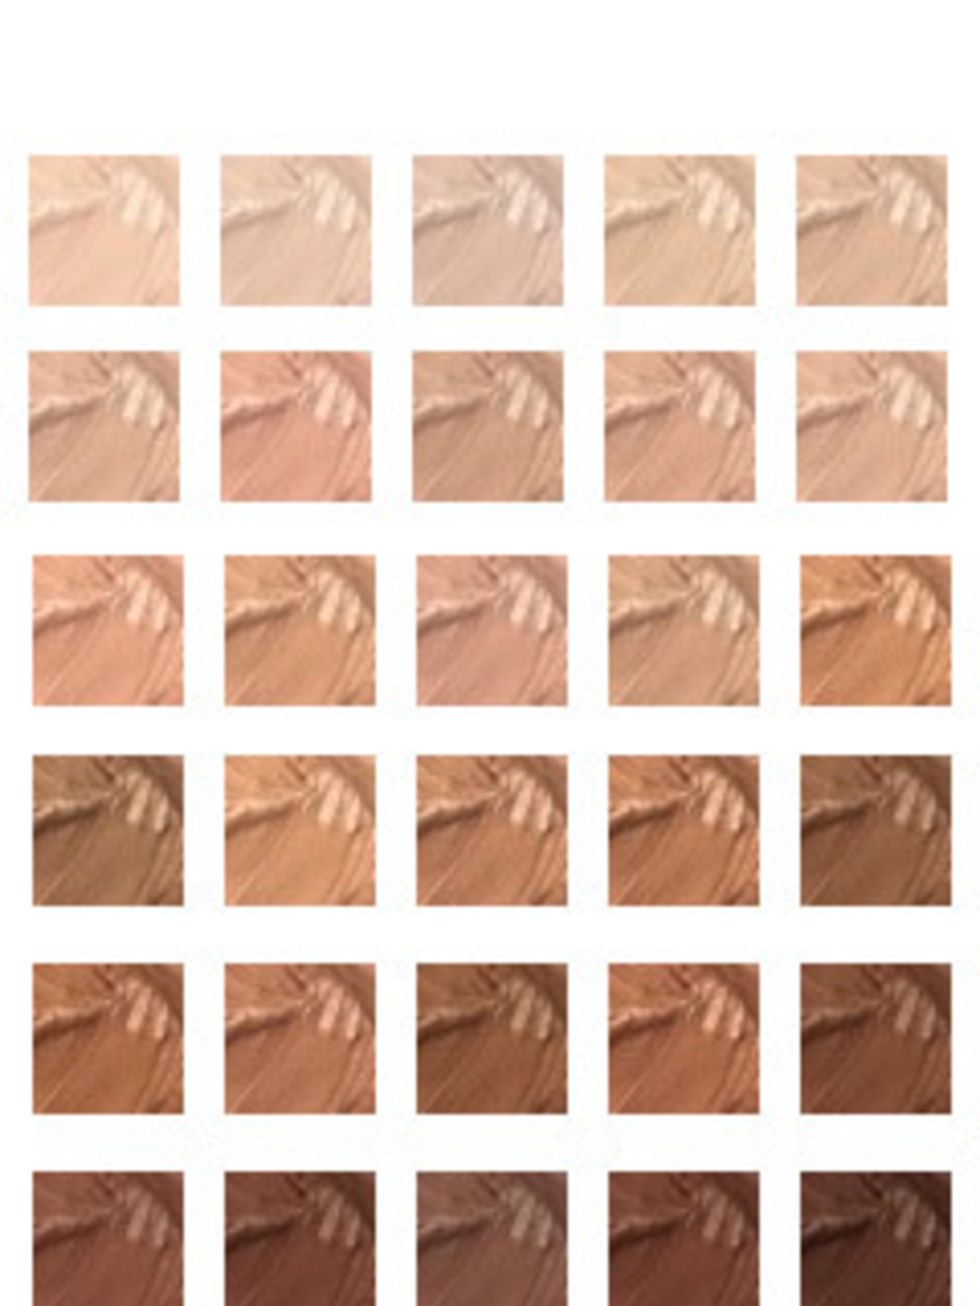 <p>Despite it costing the brand more than it actually makes in sales, Becca Cosmetics founder Rebecca Morrice Williams insists on having a whopping 30 shades of Stick Foundaton, £35, and 33 shades of Compact Concealer, £30, available to her customers. The